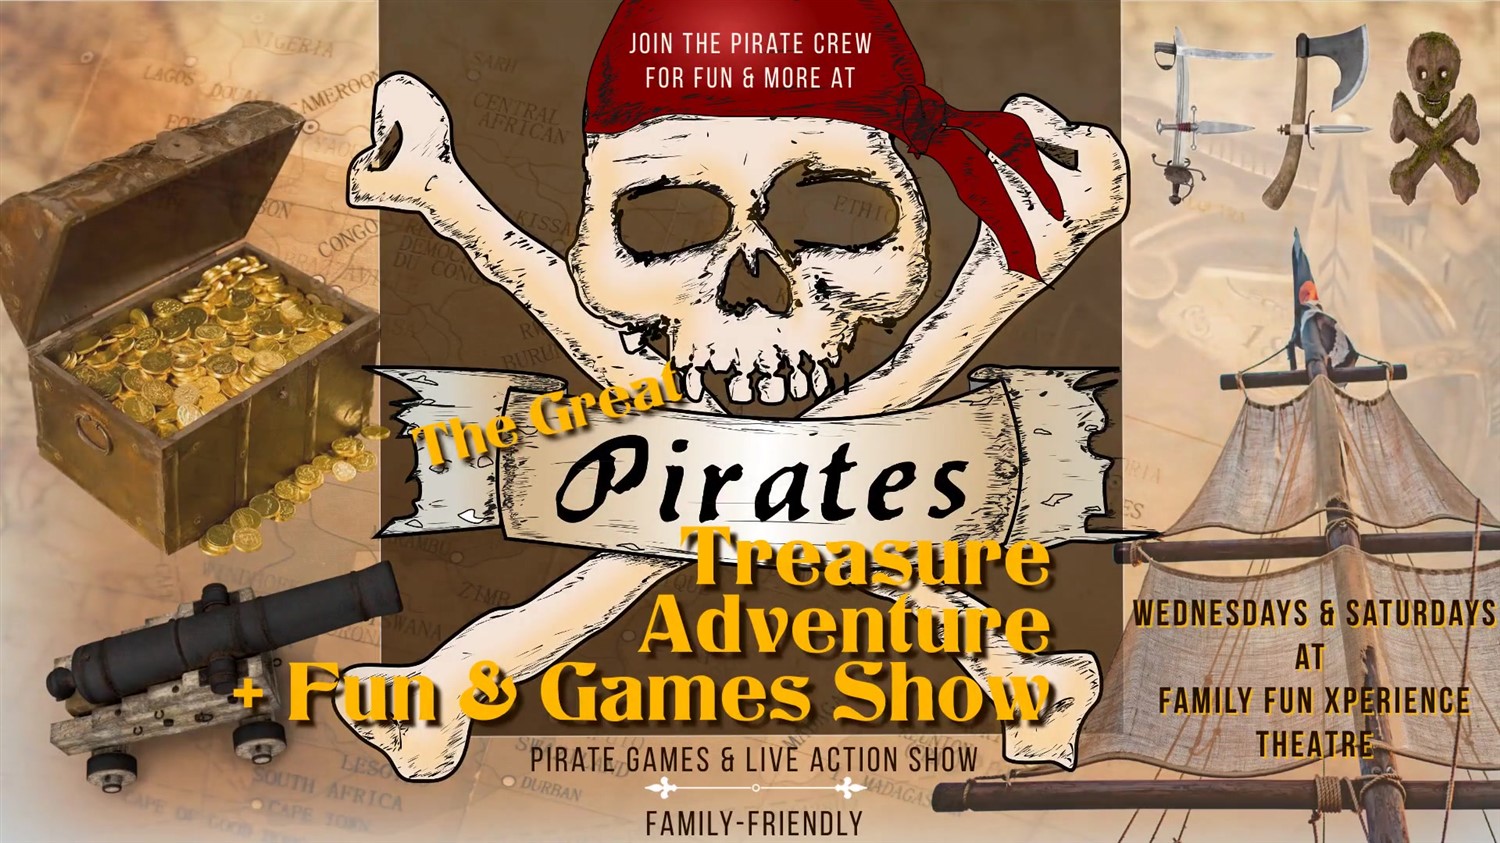 PIRATE ADVENTURE FUN & GAMES SHOW 5-Star Xperience with the Foggy FoX Pirates! on ago. 20, 19:00@FFX Theatre - Pick a seat, Buy tickets and Get information on Family Fun Xperience tickets.ffxshow.org